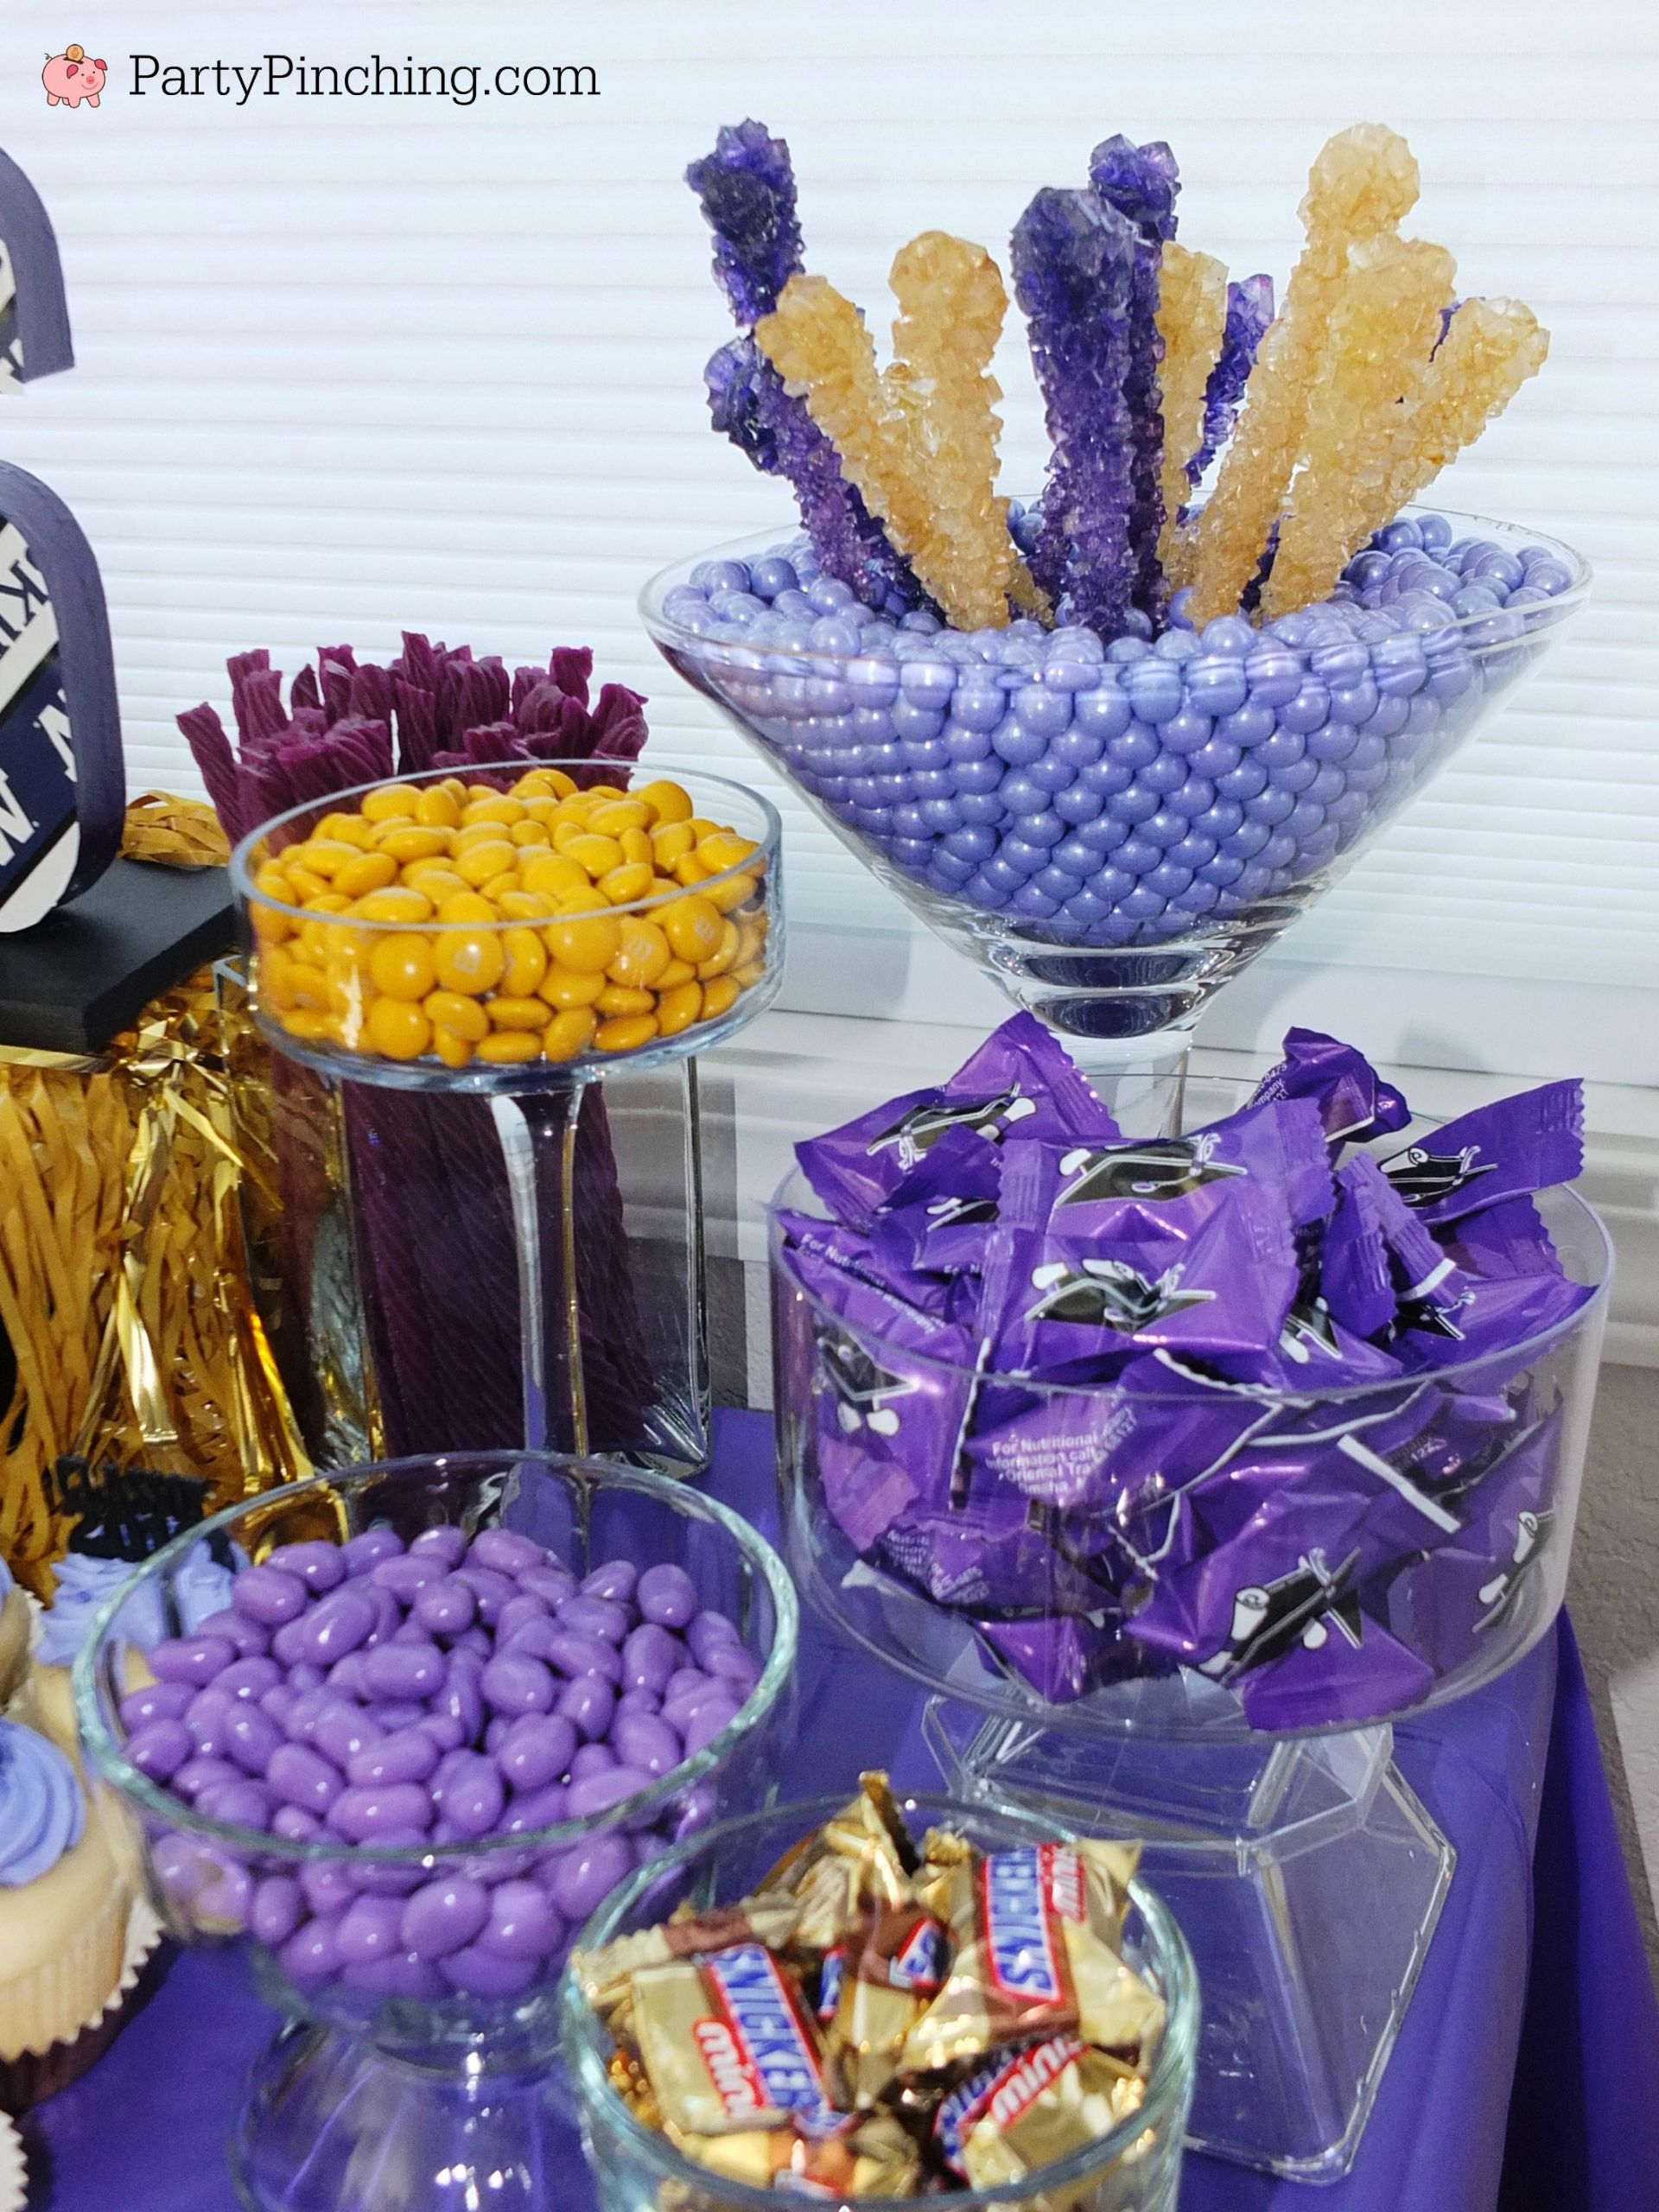 Buffet Ideas For Graduation Party
 College Graduation Party Graduation Party Ideas and Food